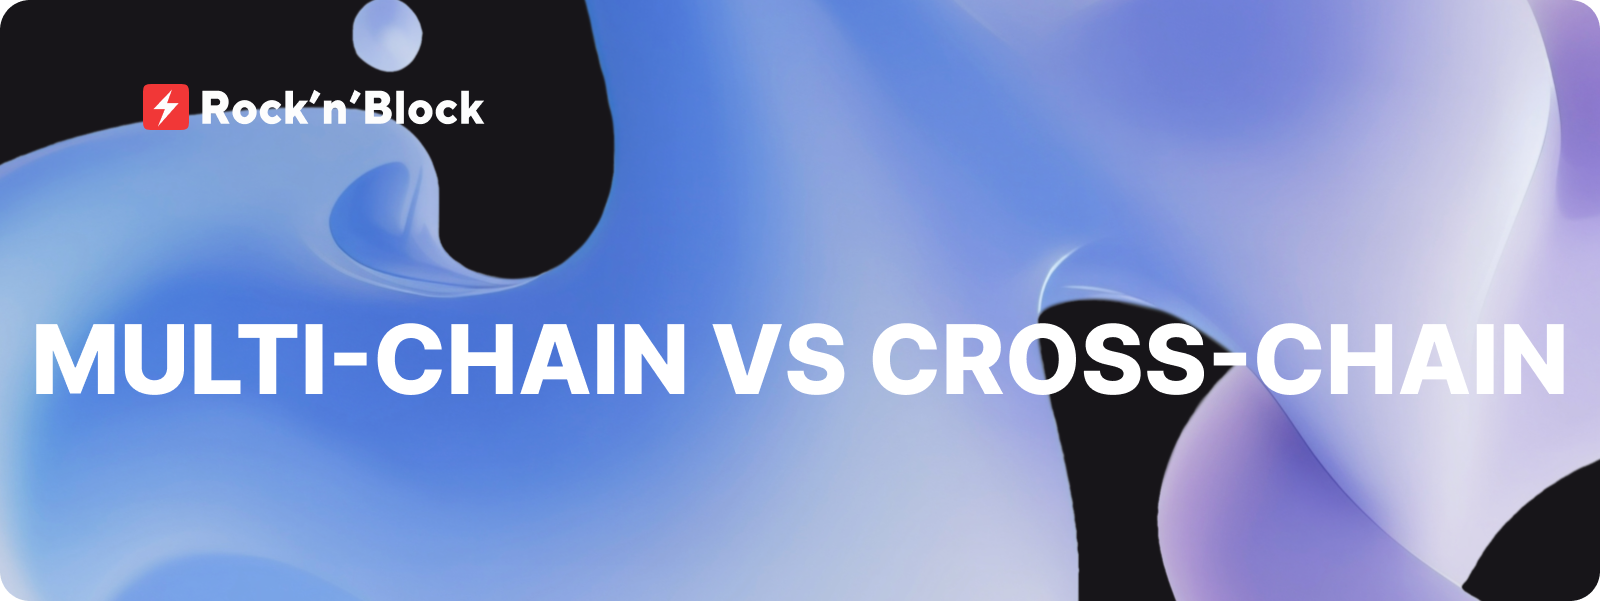 Differences Between Multi-Chain and Cross-Chain project development